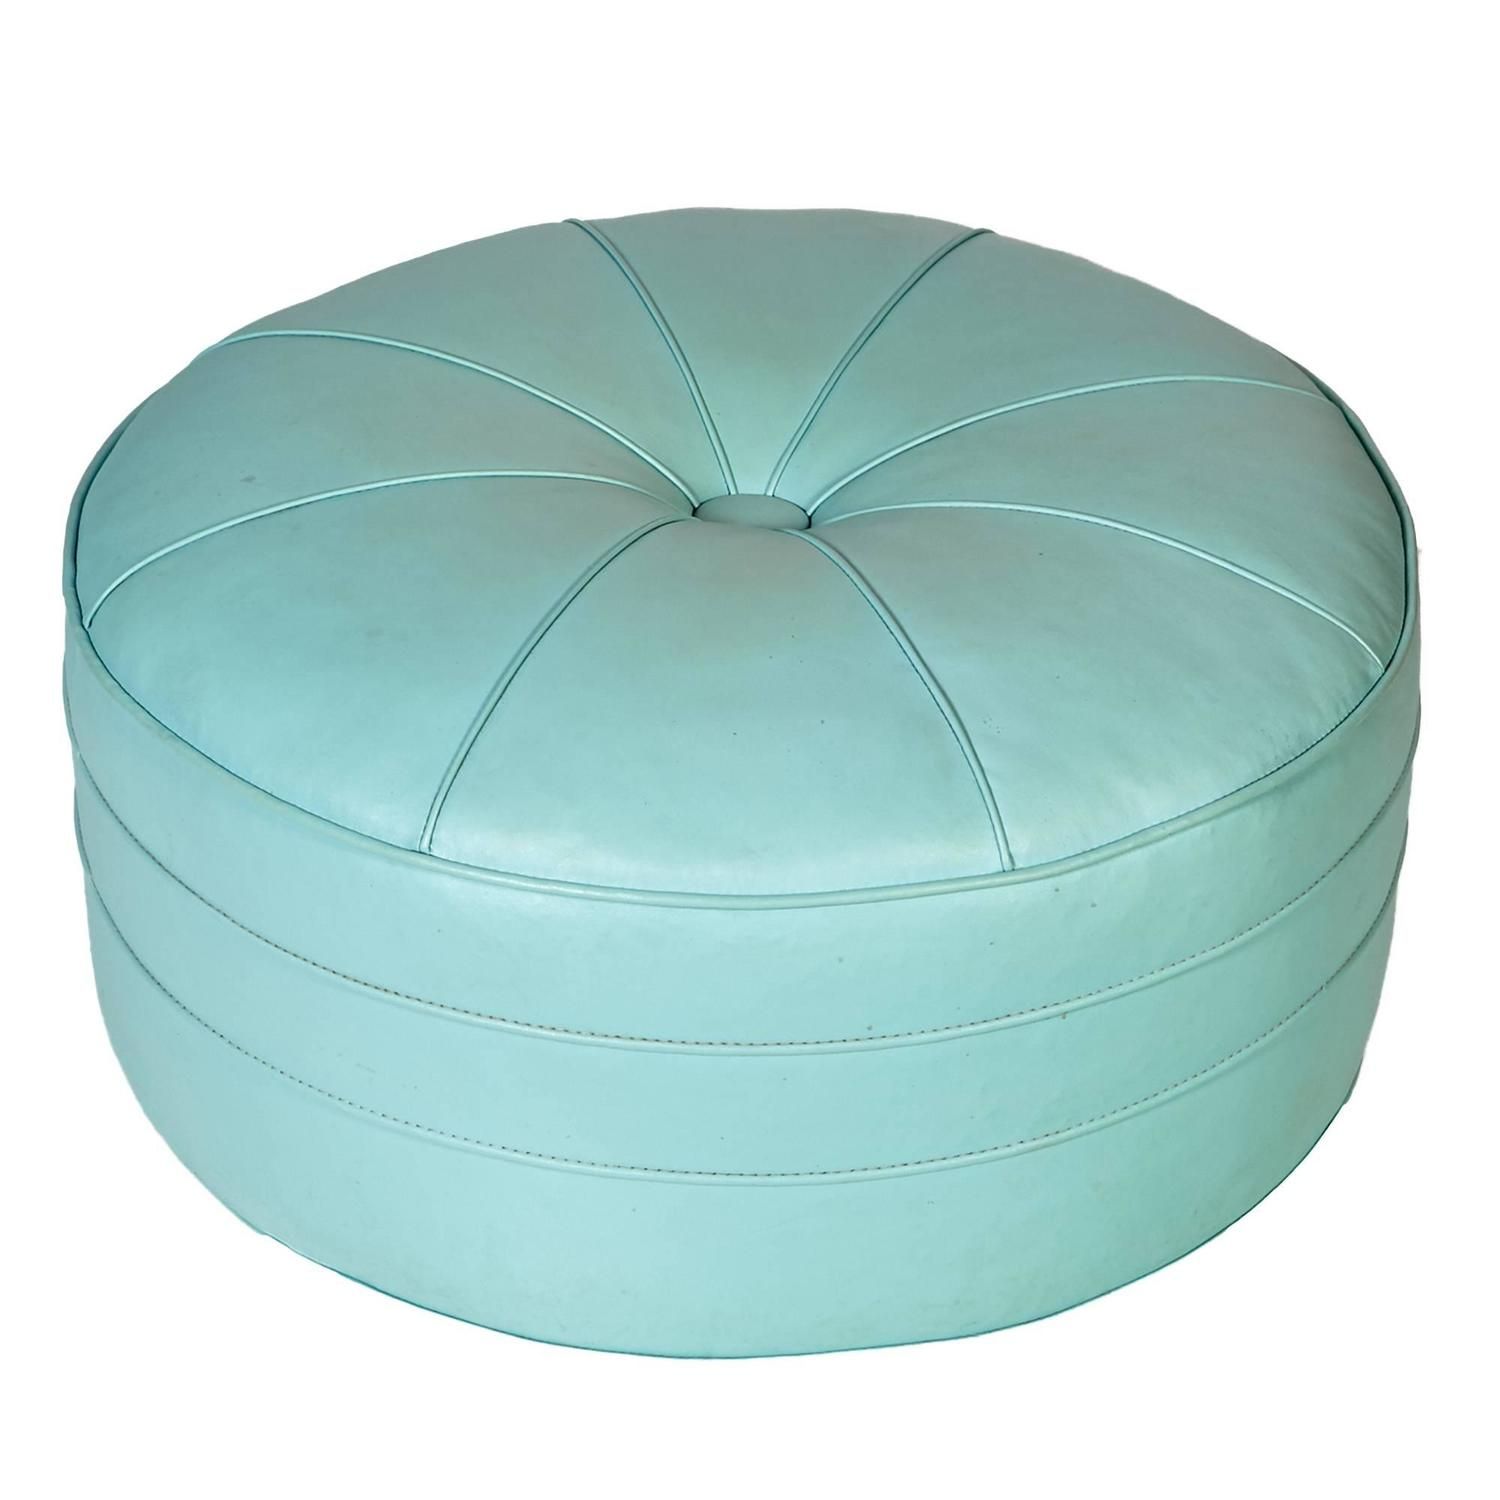 1960s Turquoise Over Sized Round Pouf / Ottoman For Sale At 1stdibs Throughout Textured Aqua Round Pouf Ottomans (View 13 of 20)